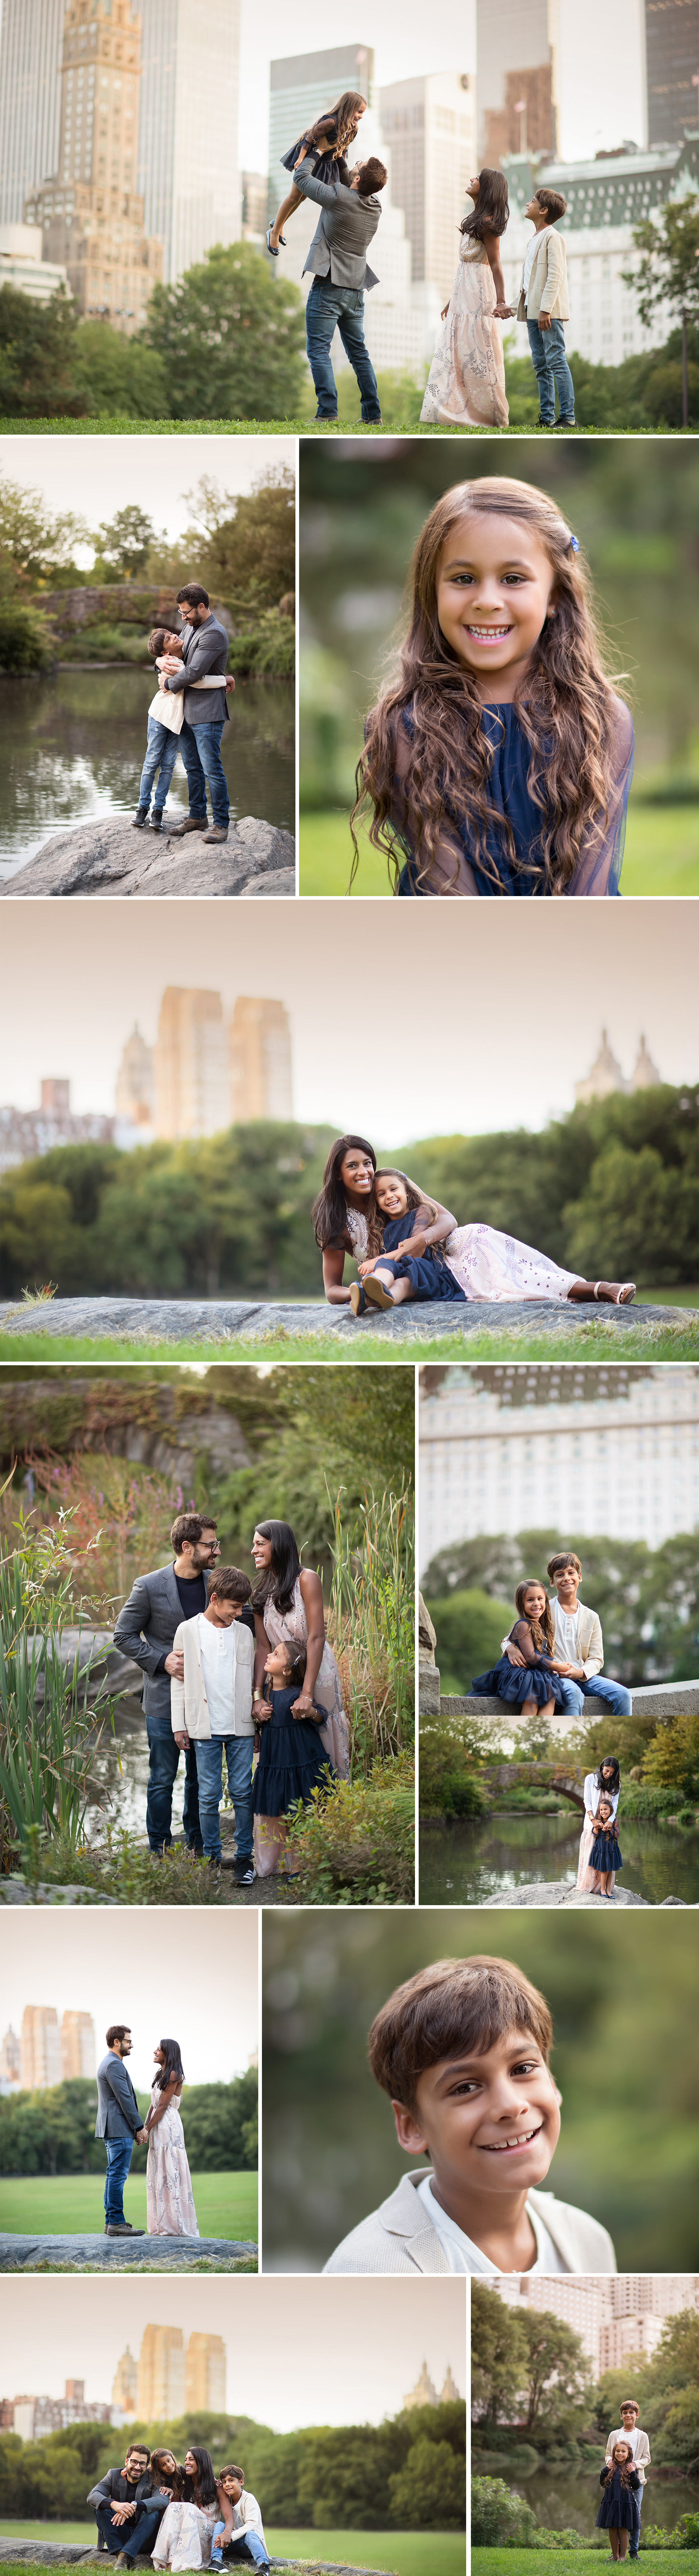 outdoors family photographer central park nyc